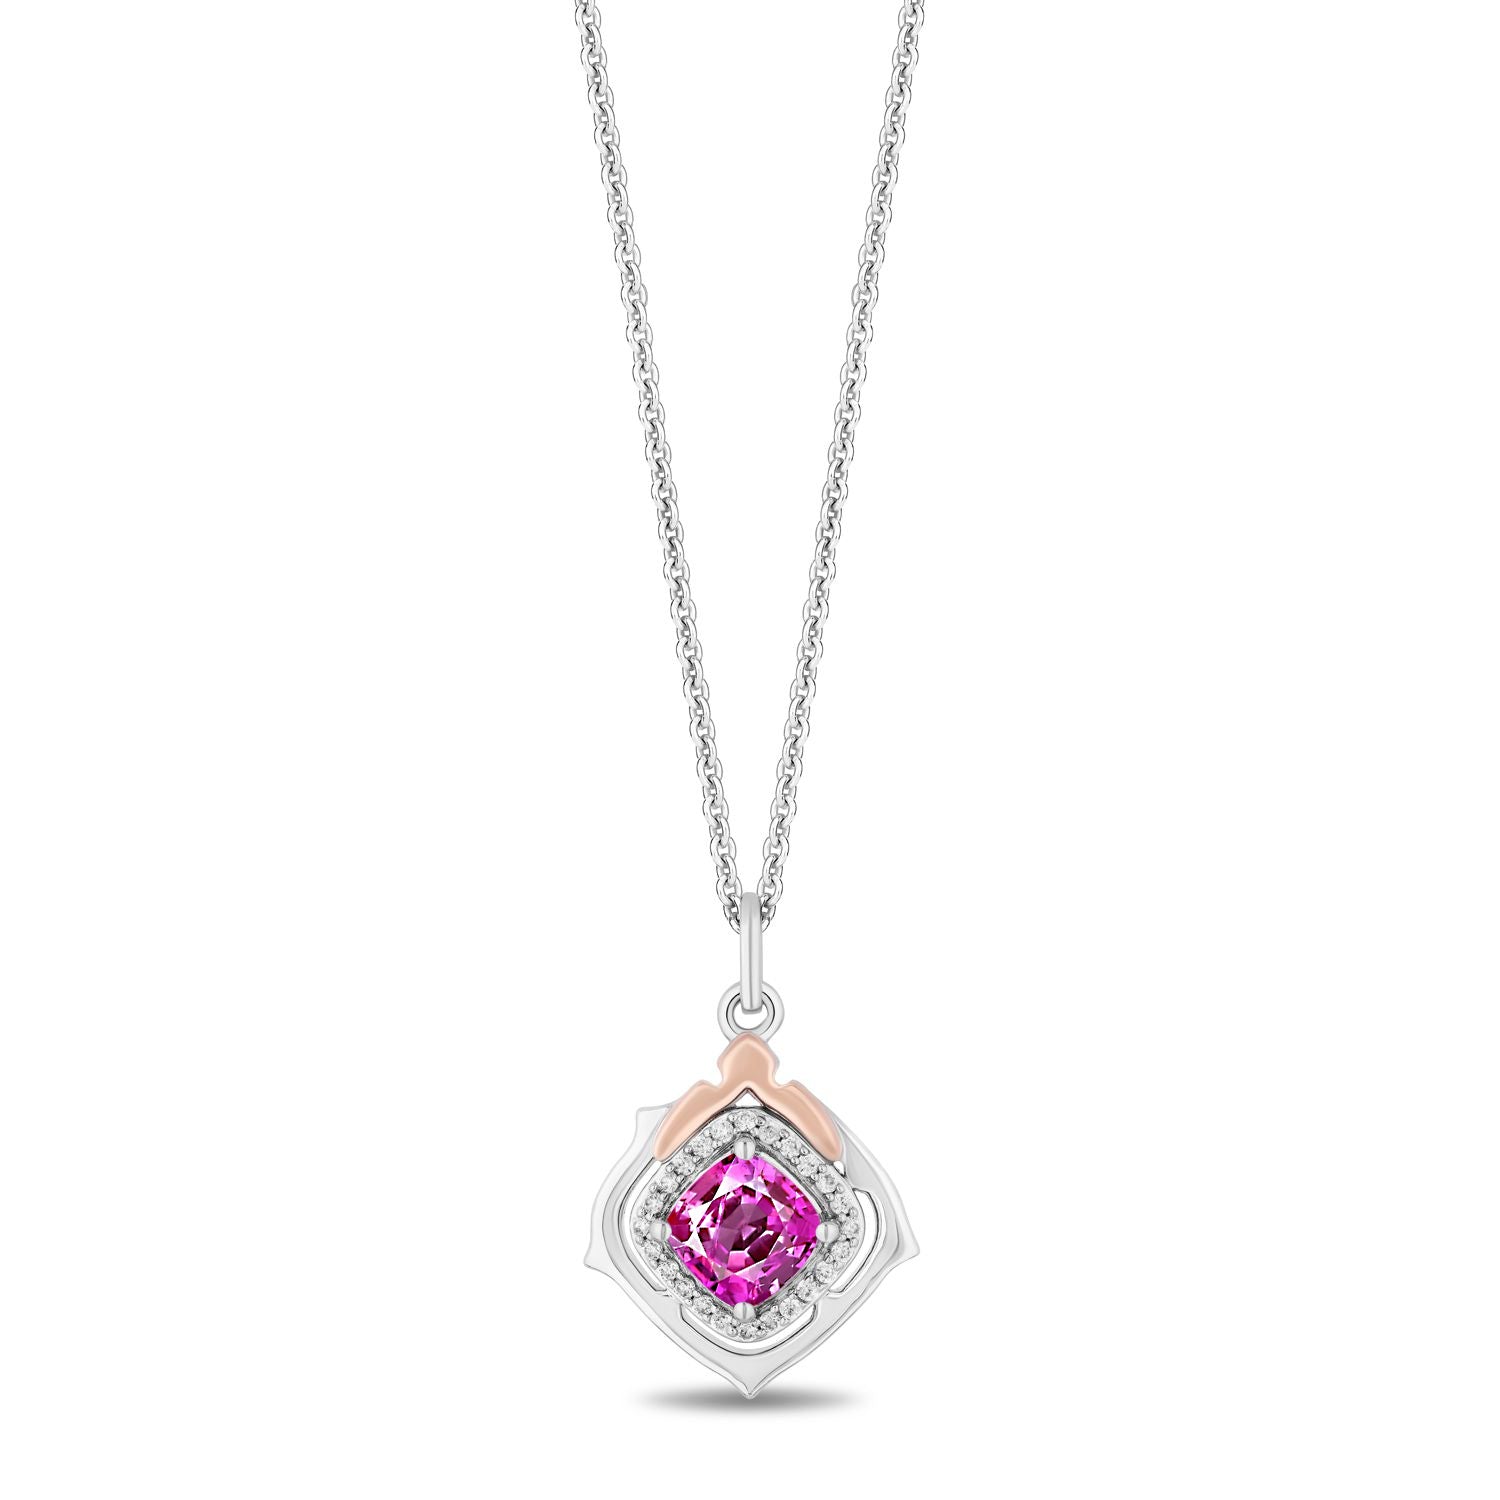 Enchanted Disney Fine Jewelry Pink Cultured Freshwater Pearl (8mm) Diamond  (1/7 ct. t.w.) Ariel Shell Pendant Necklace in Sterling Silver & 14k Rose  Gold, 16 + 2 extender - Macy's